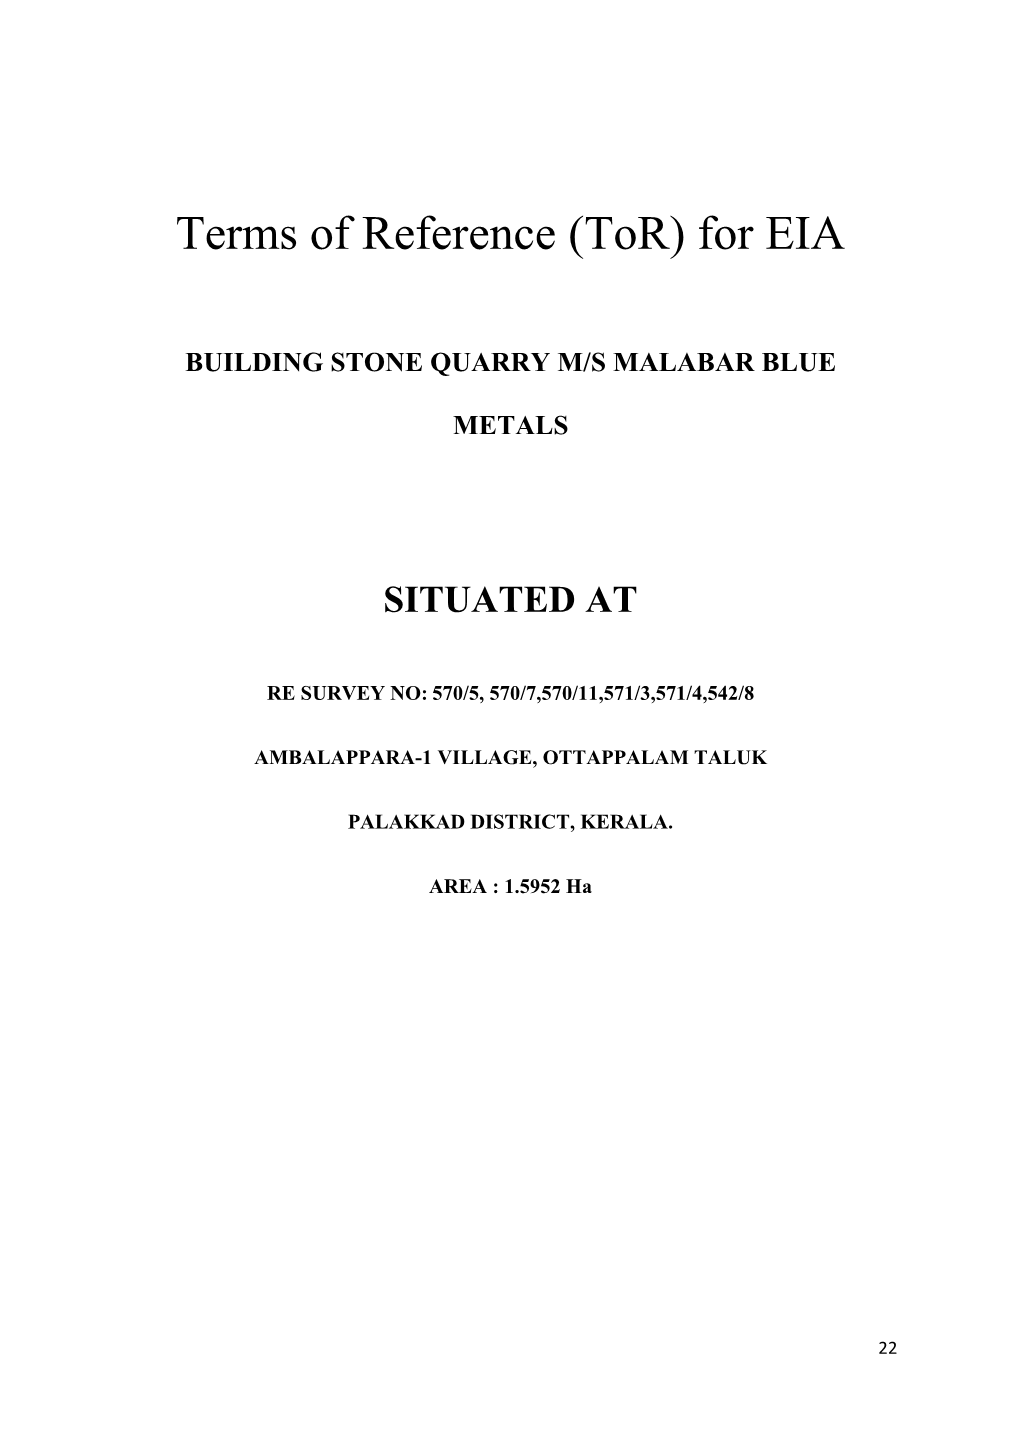 Terms of Reference (Tor) for EIA